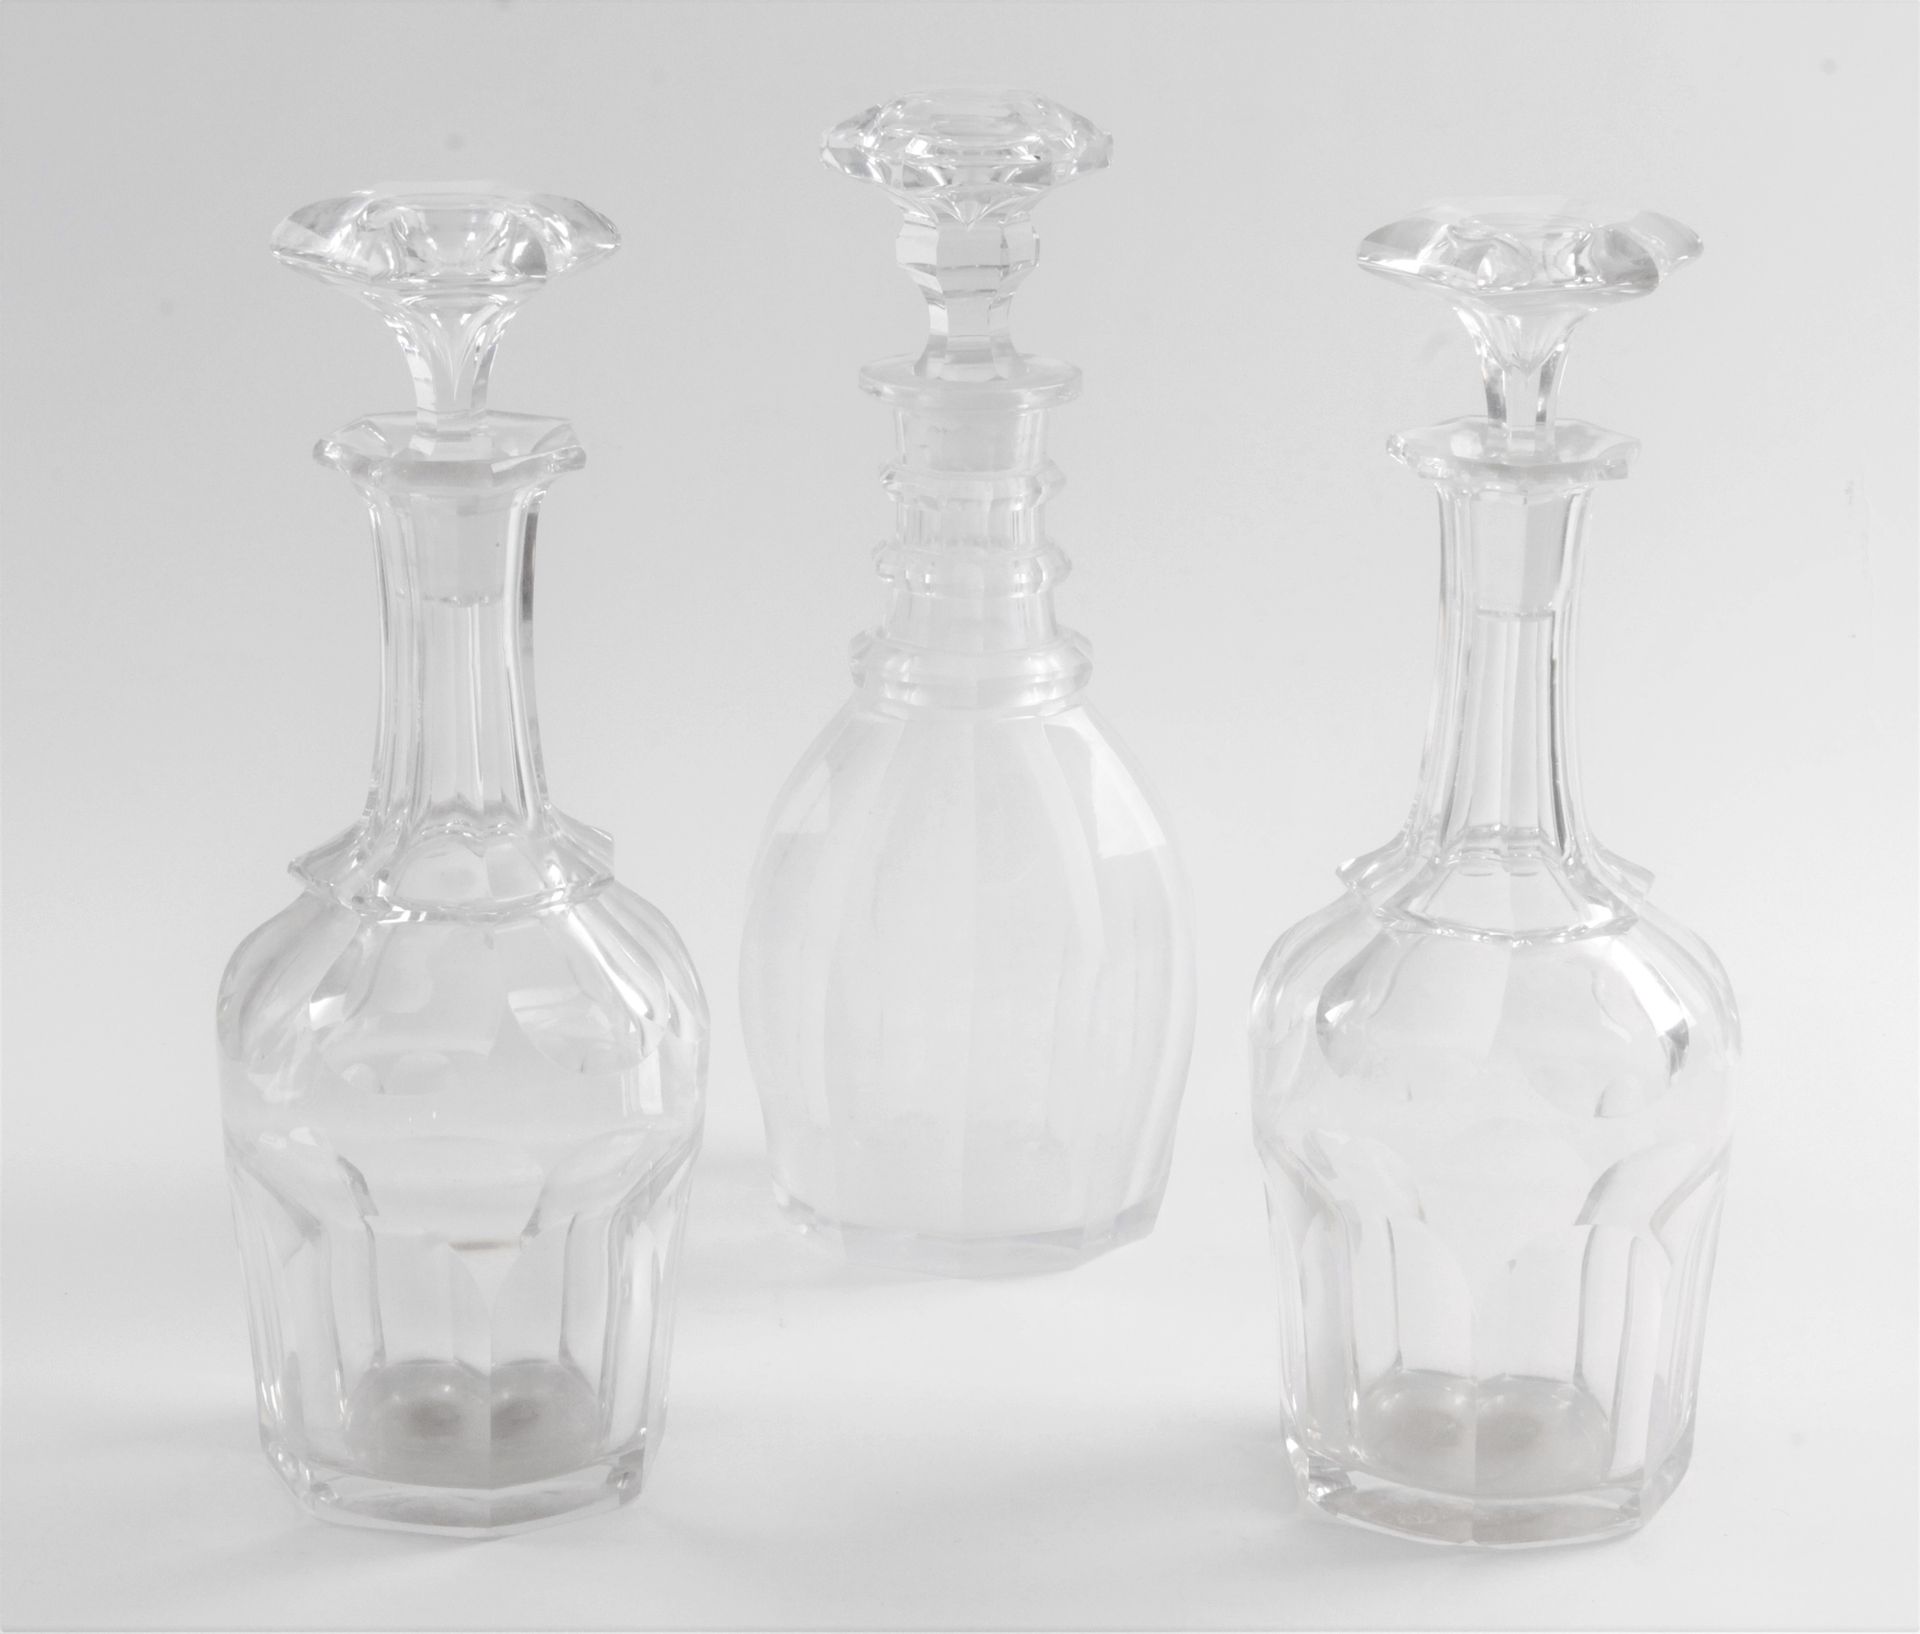 Null THREE CARAFES and their stoppers in faceted crystal. 

Period : XIXth centu&hellip;